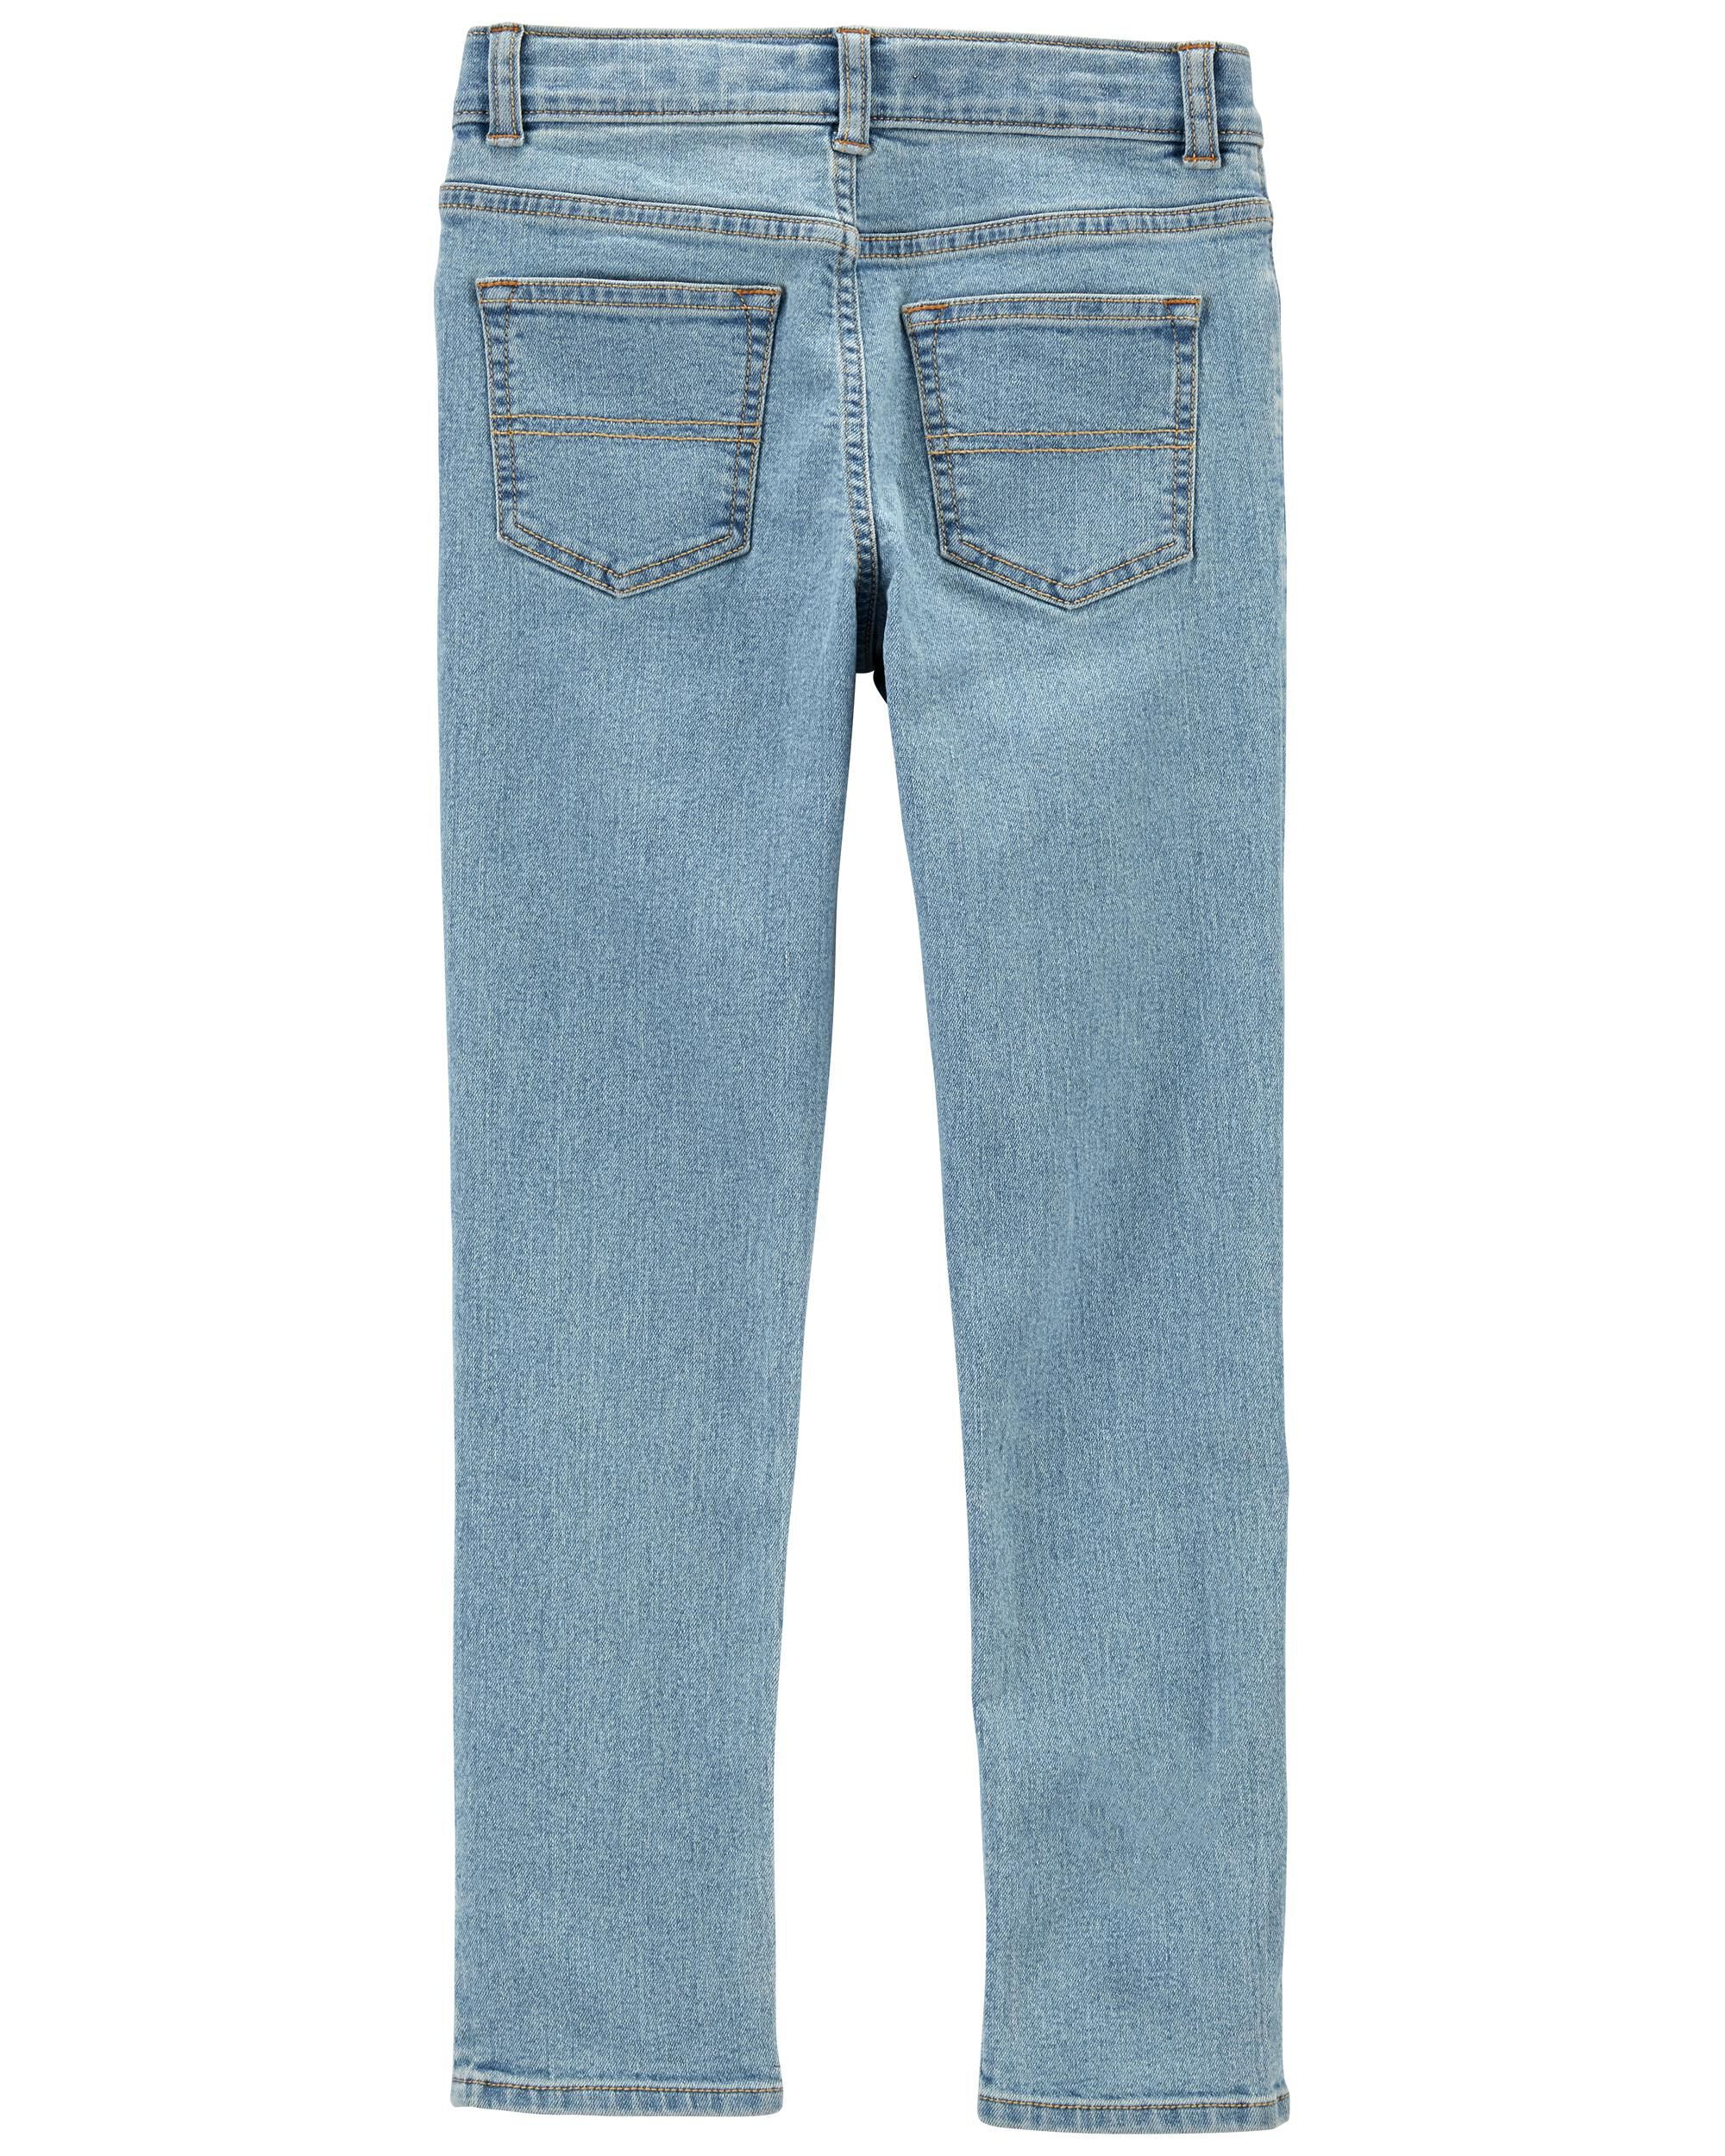 Fashion Jeans in Light Wash